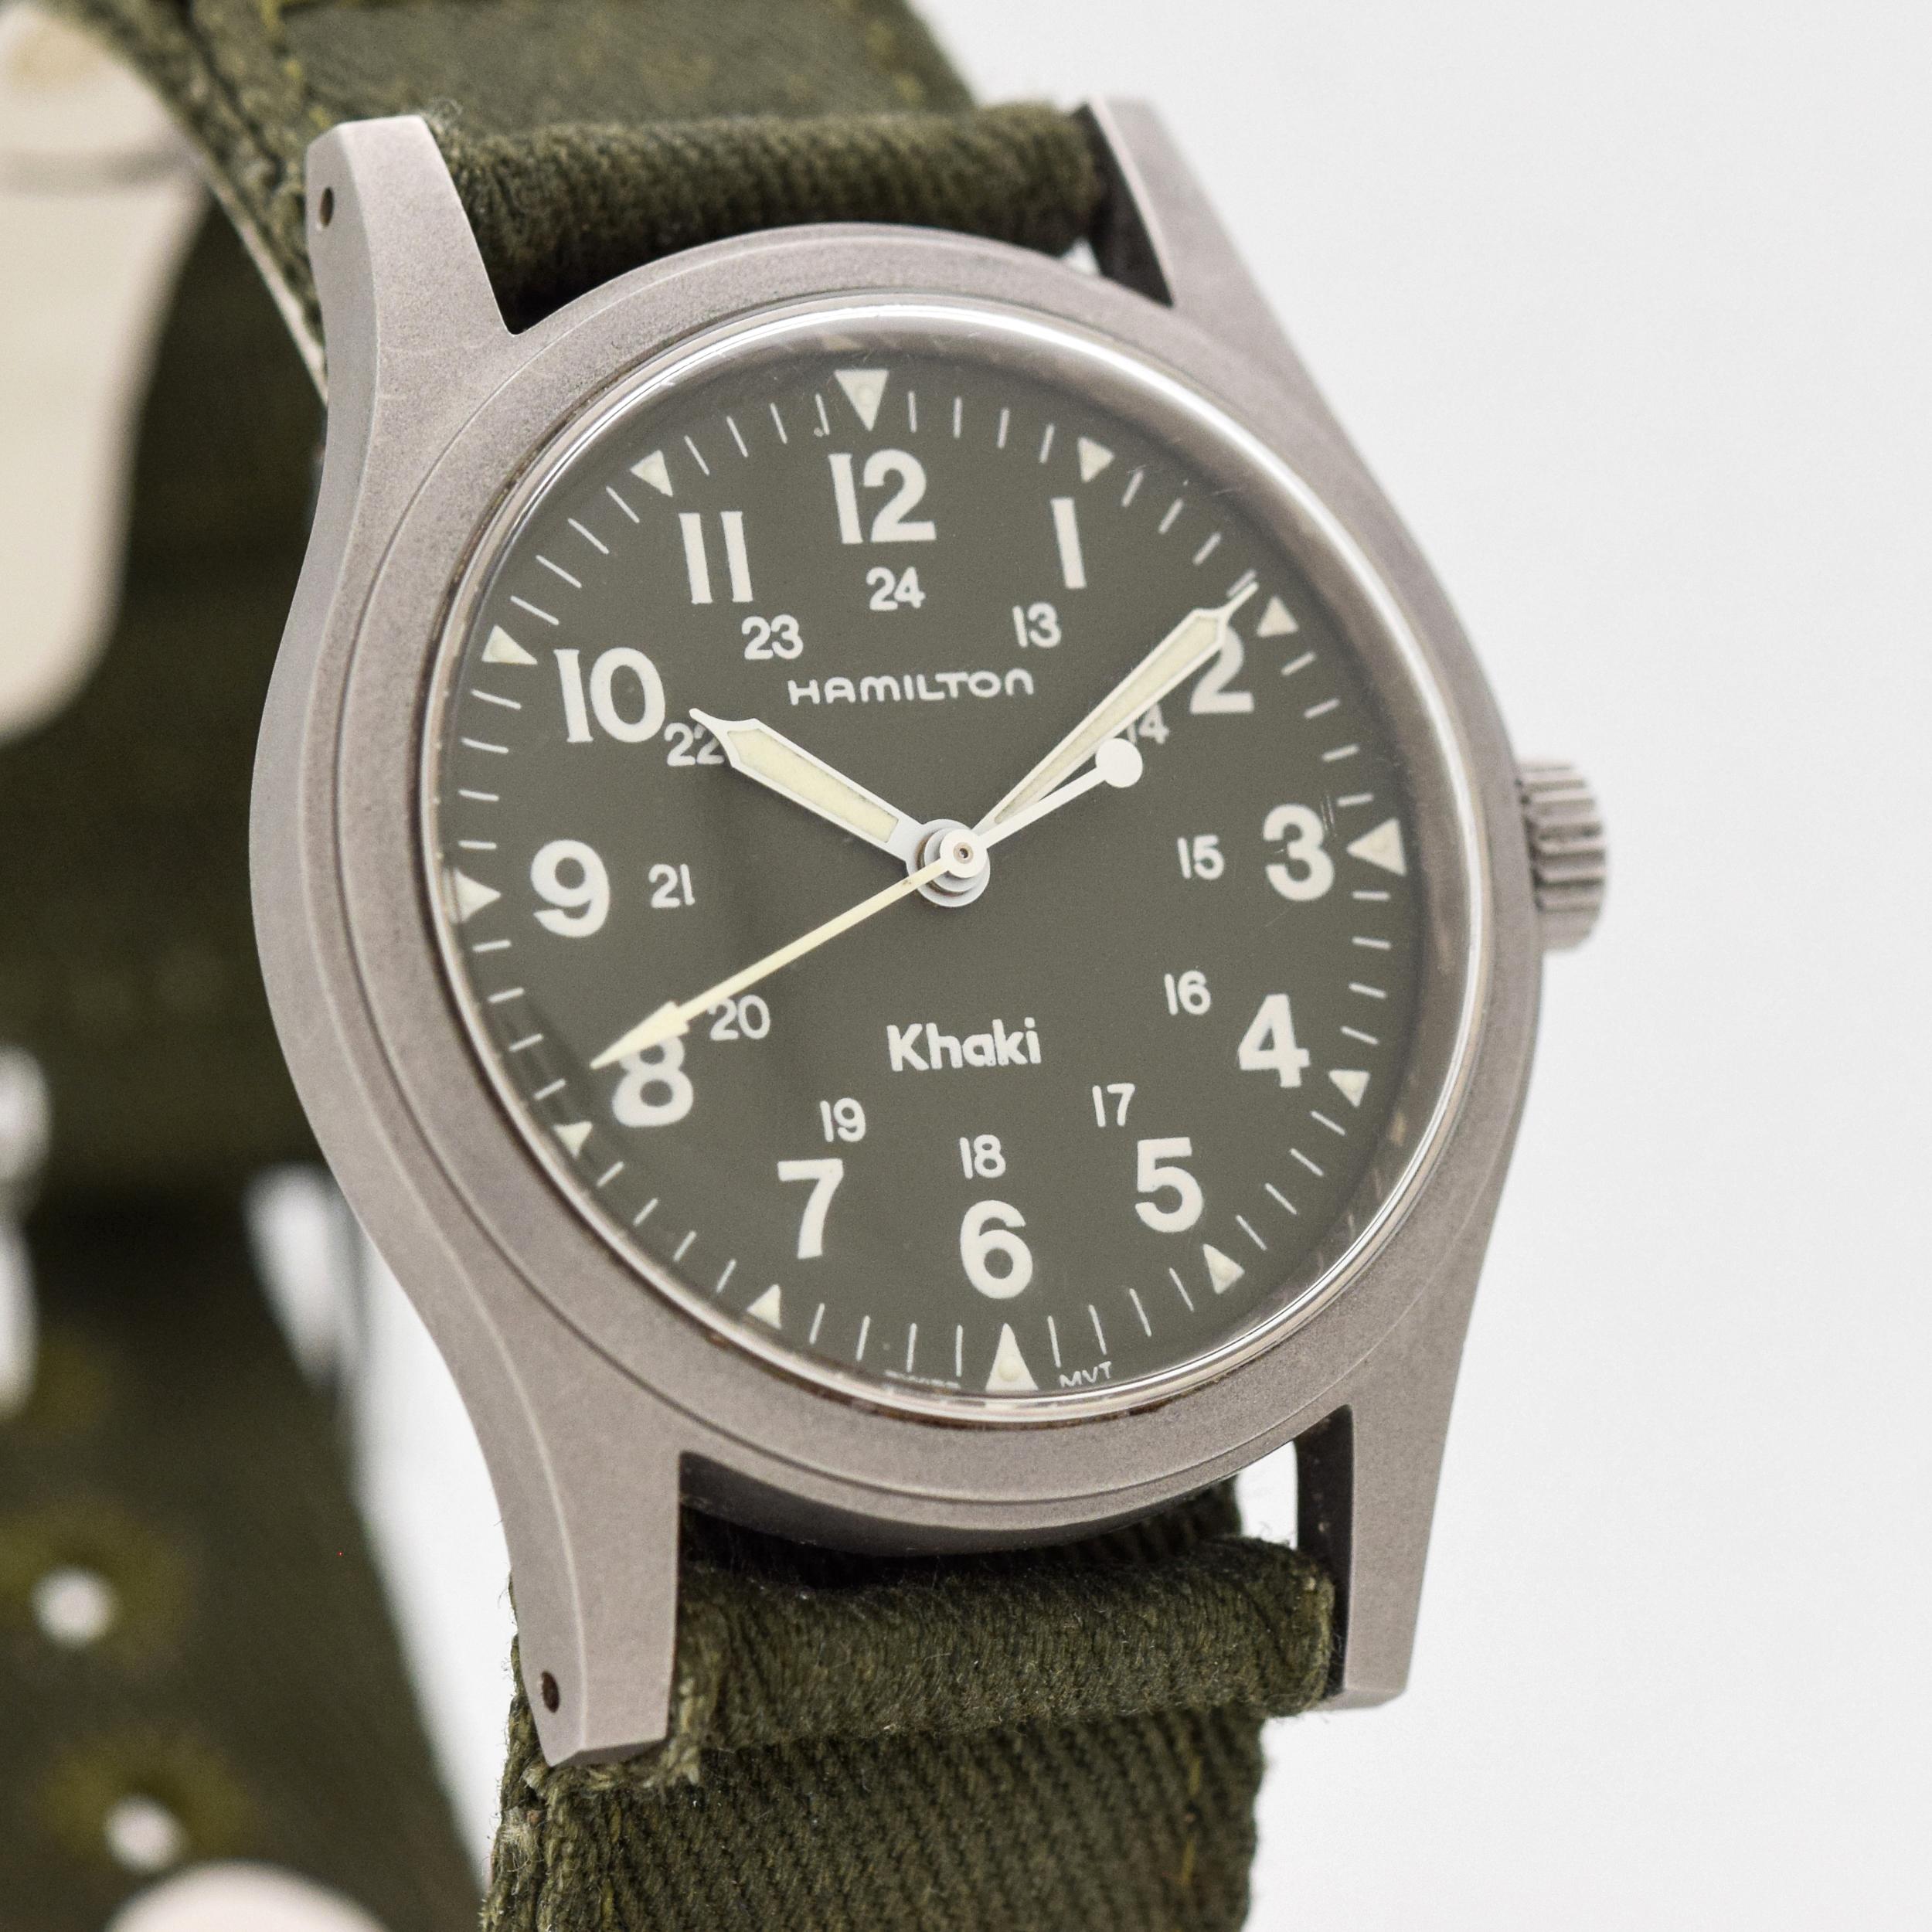 1980's - 1990's Vintage Hamilton Khaki Ref. 9415A Military Style Steel watch with Original Green Dial with White Arabic Numbers. Case size, 32mm x 38mm lug to lug (1.26 in. x 1.5 in.) - Powered by a 17-jewel, manual caliber ETA movement. Triple